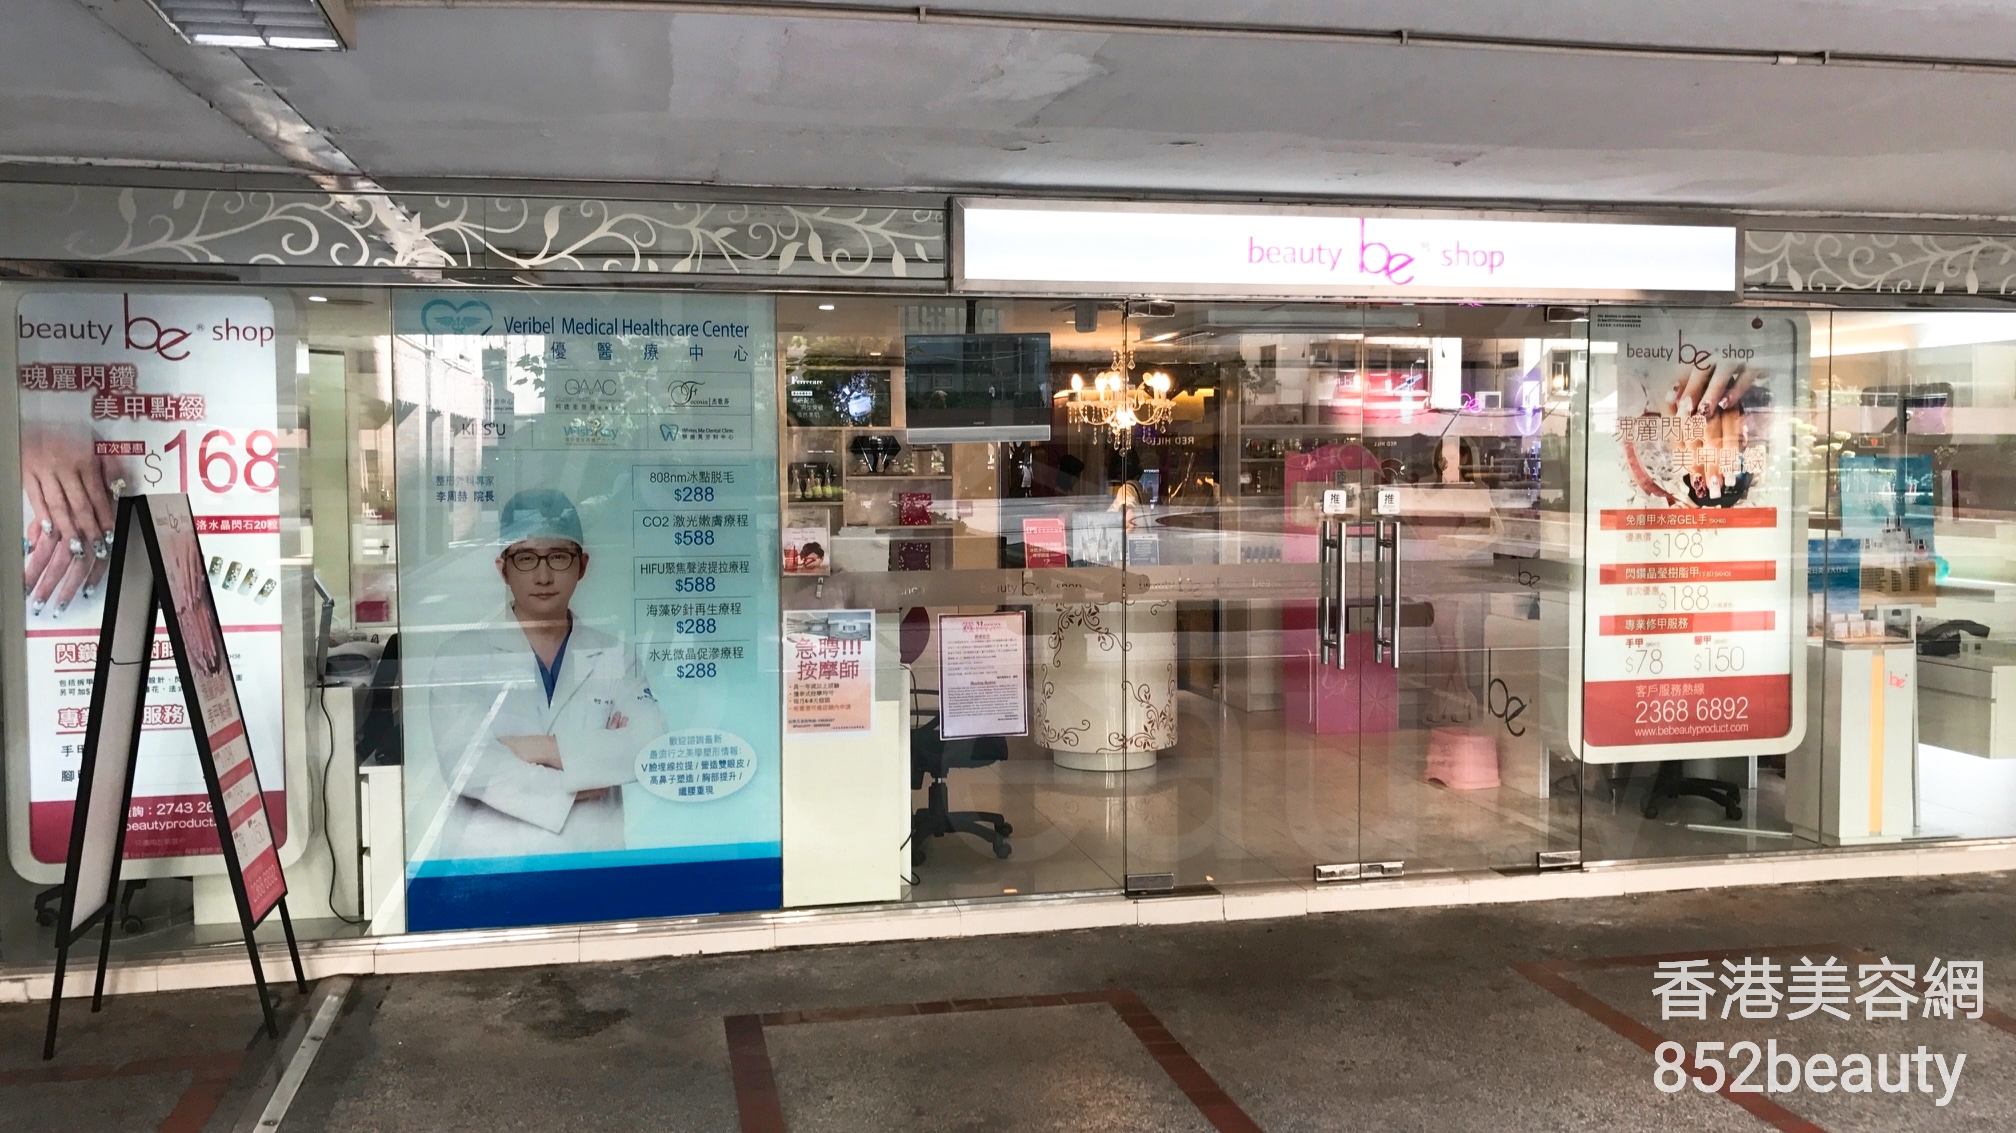 Hand and foot care: be beauty shop (美孚新村)